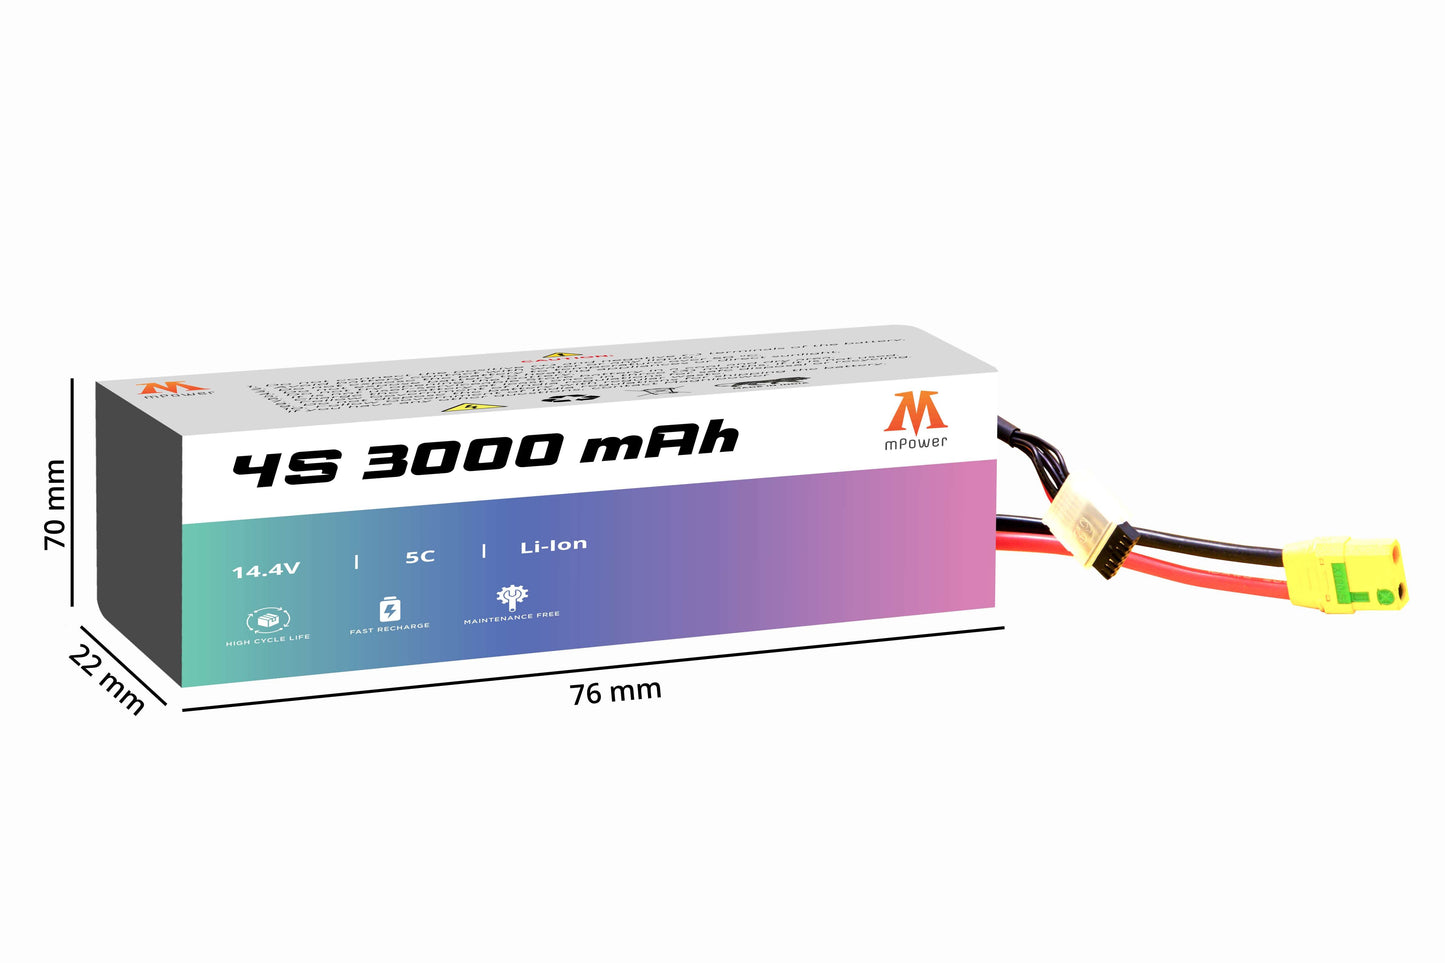 mPower 4S 3000mAh Lithium-Ion Battery for Surveillance Drones